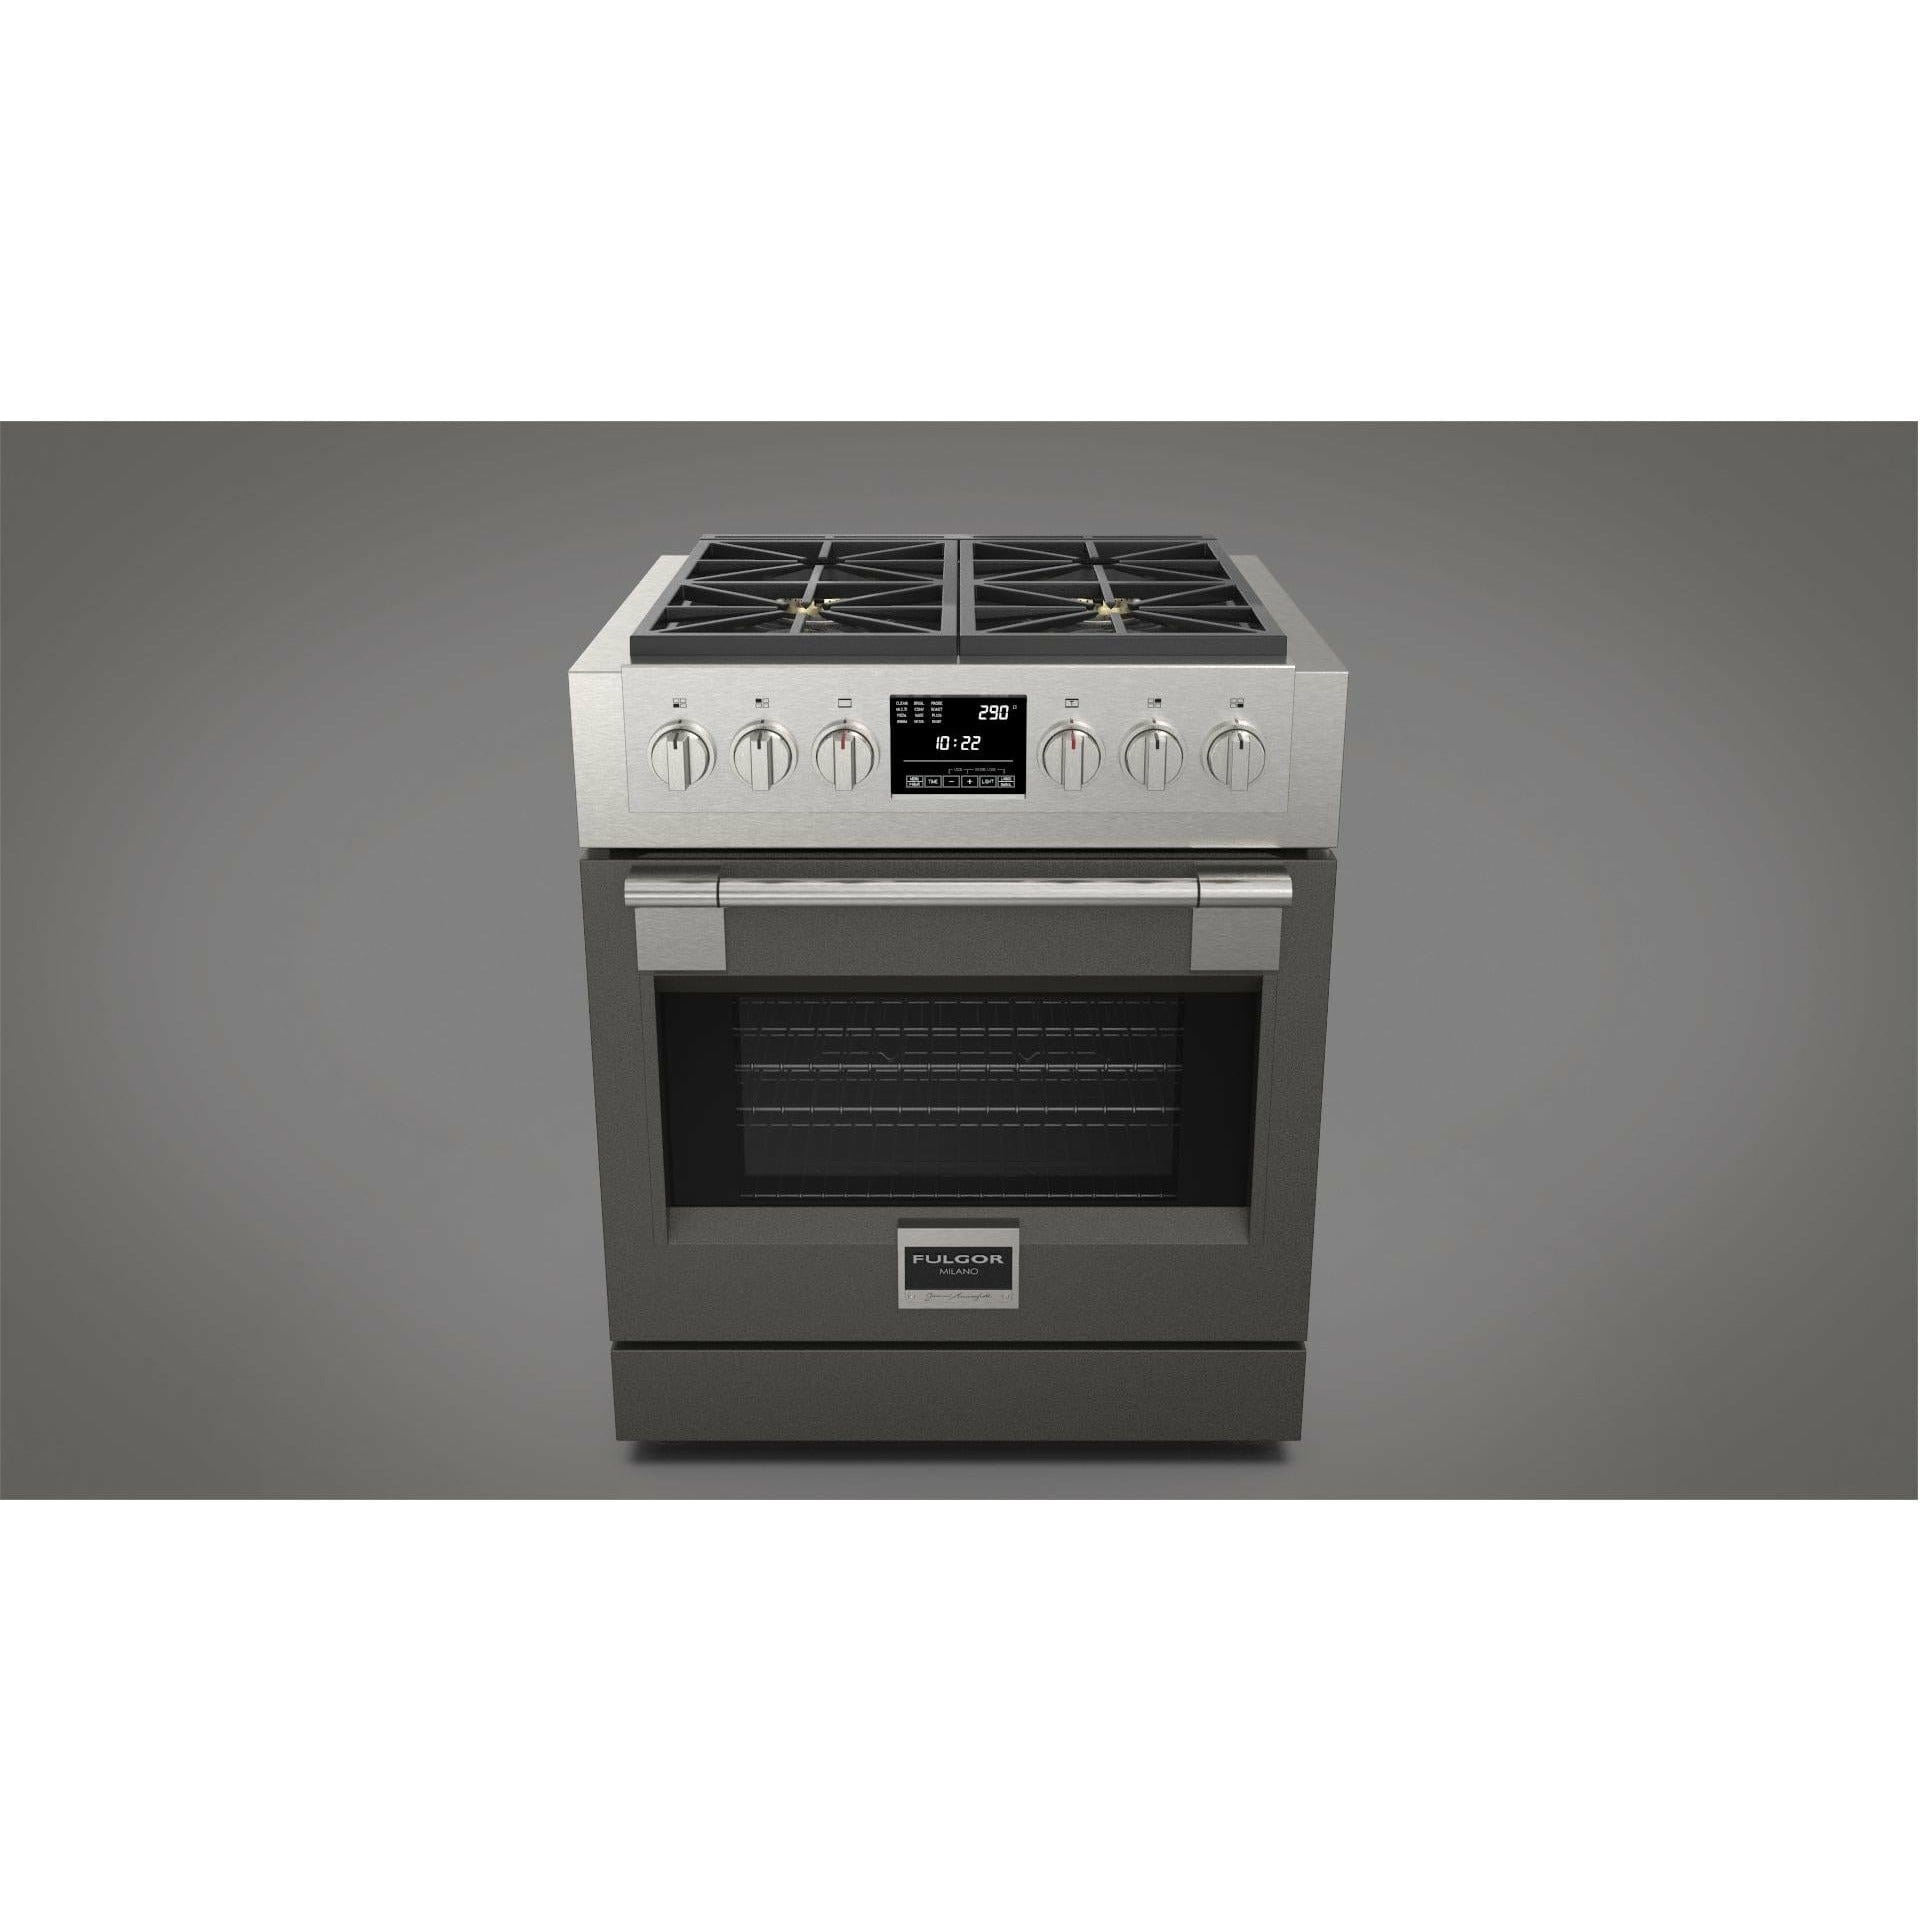 Fulgor Milano 30" Freestanding Dual Fuel Pro Range with 4 18,000-BTU Burners, Stainless Steel - F6PDF304S1 Ranges PDRKIT30MG Luxury Appliances Direct